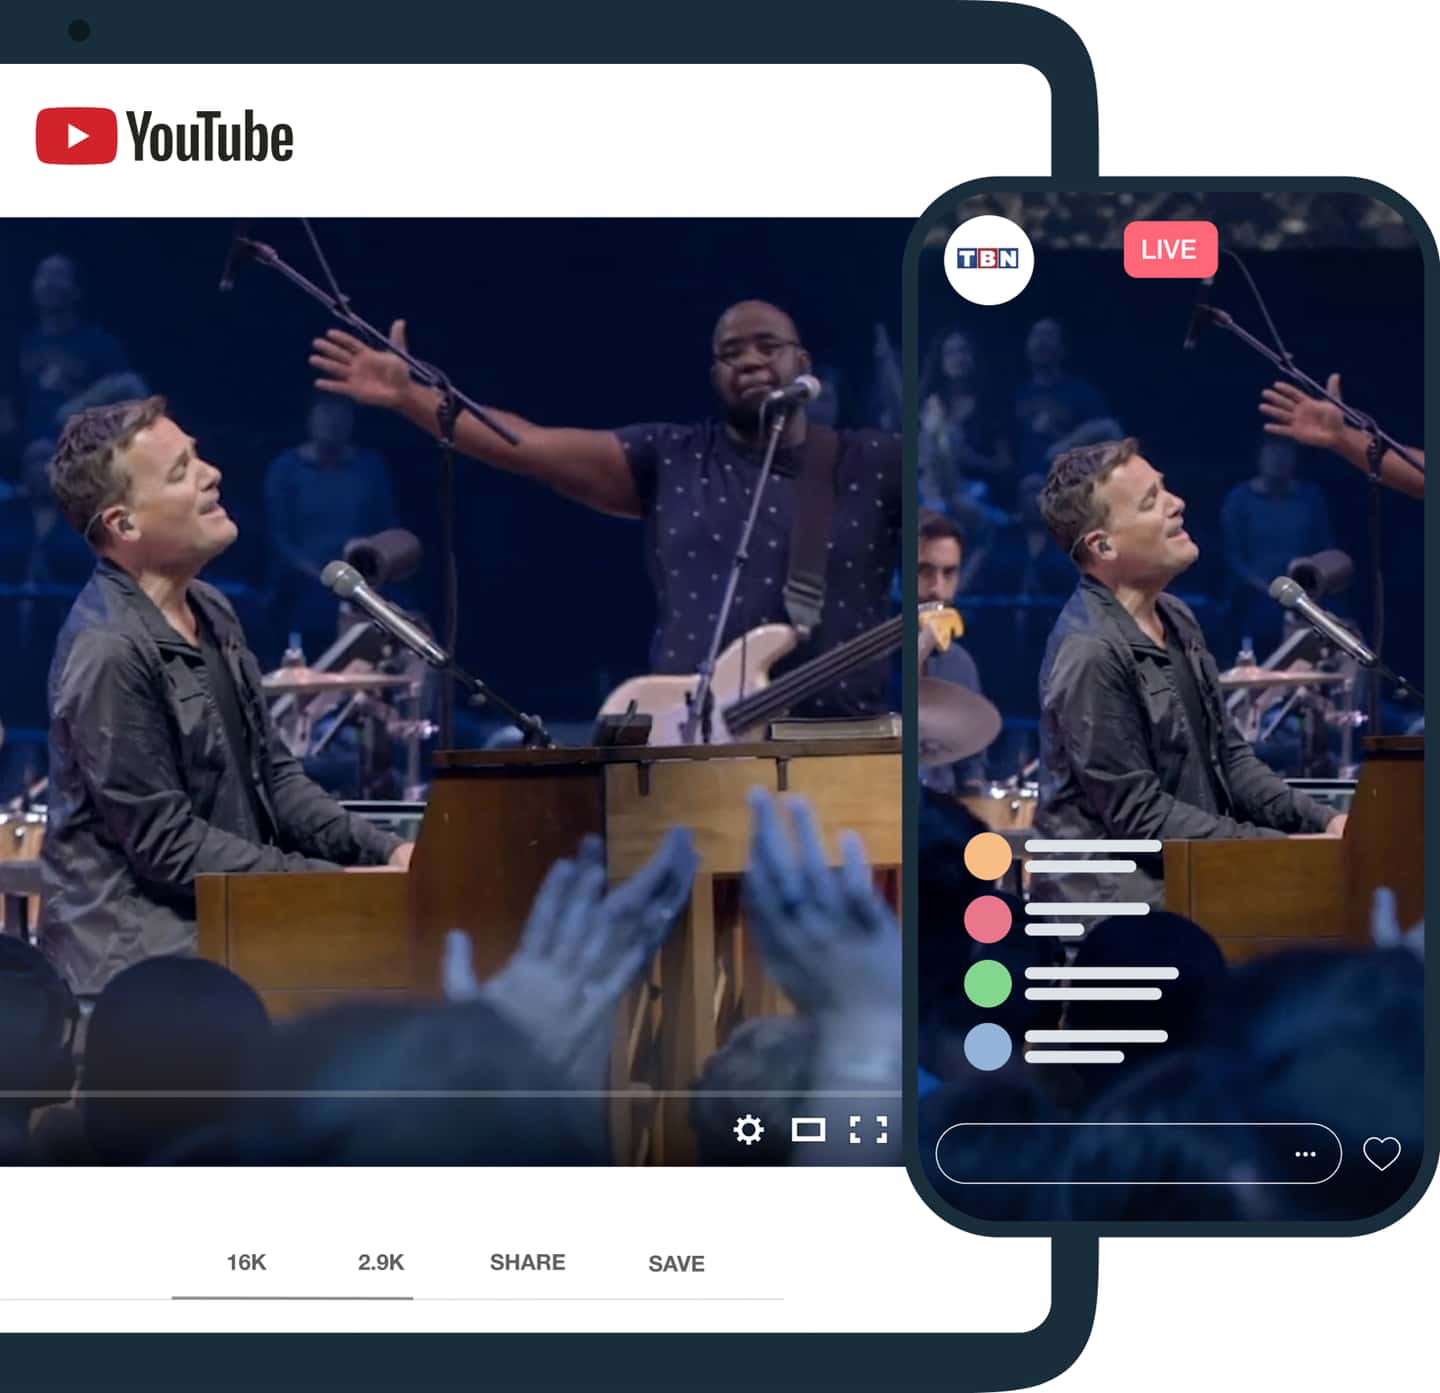 Livestreaming events to LinkedIn and Facebook simultaneously from Vimeo